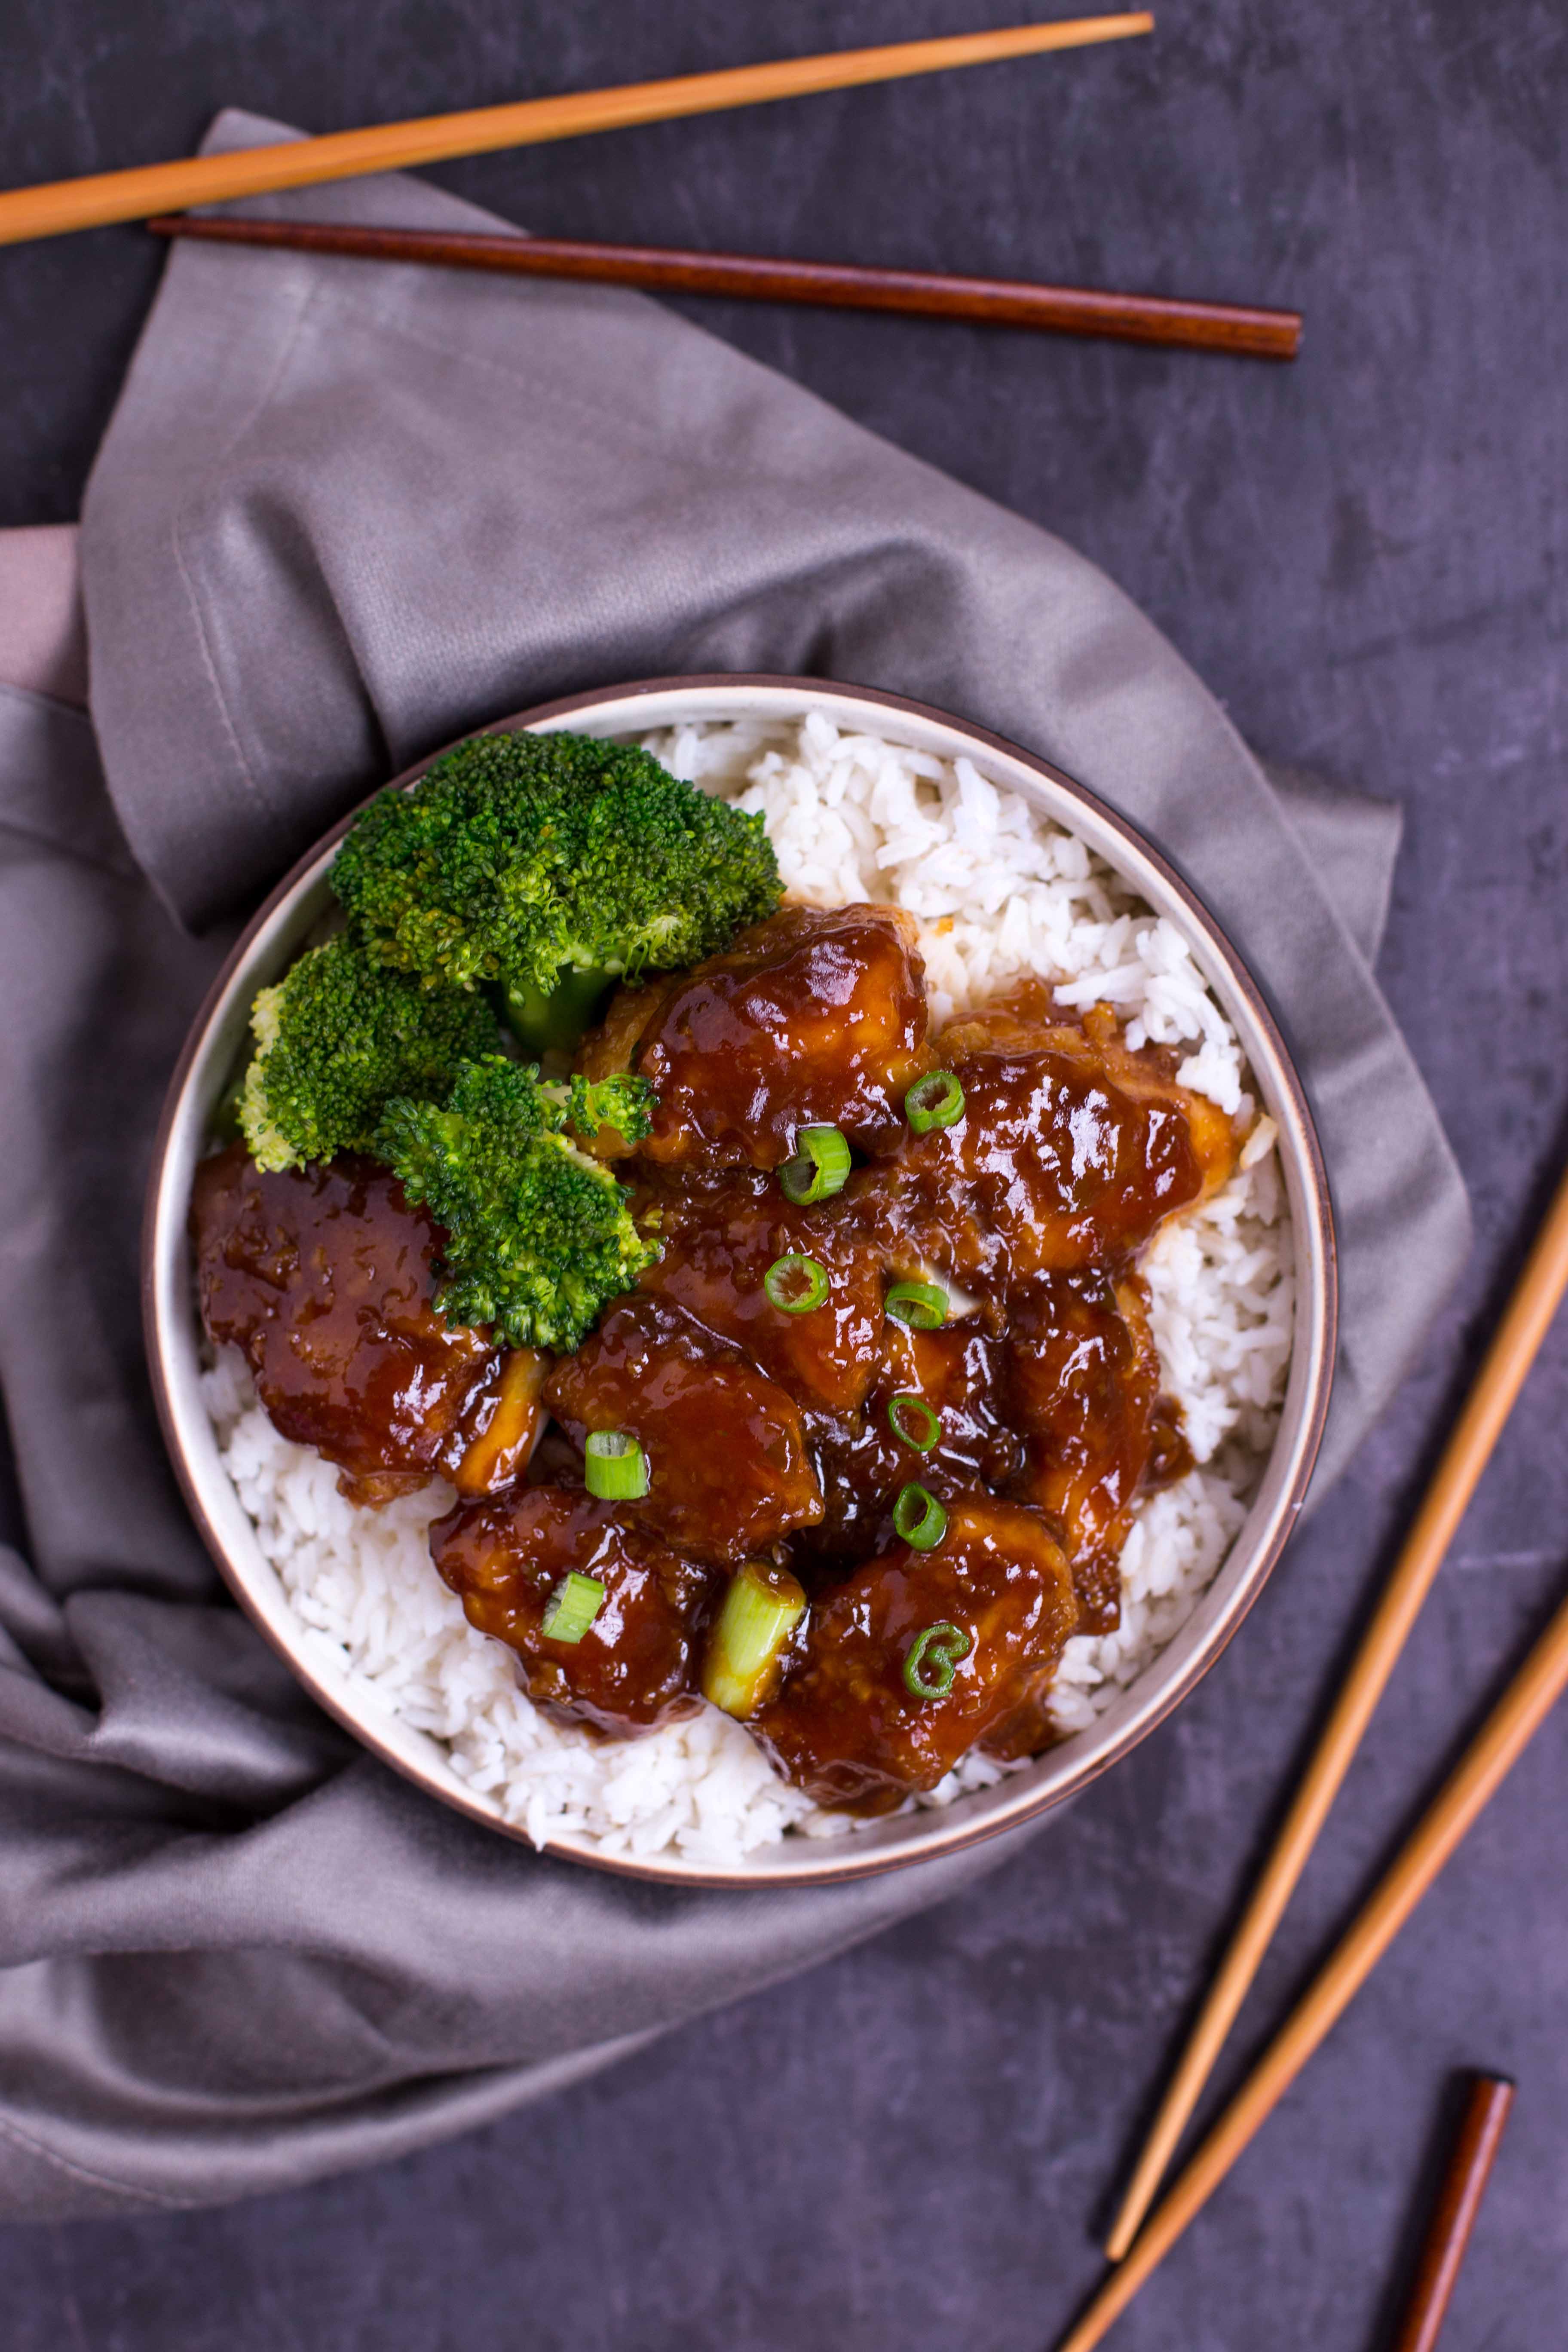 Baked General Tso's Chicken